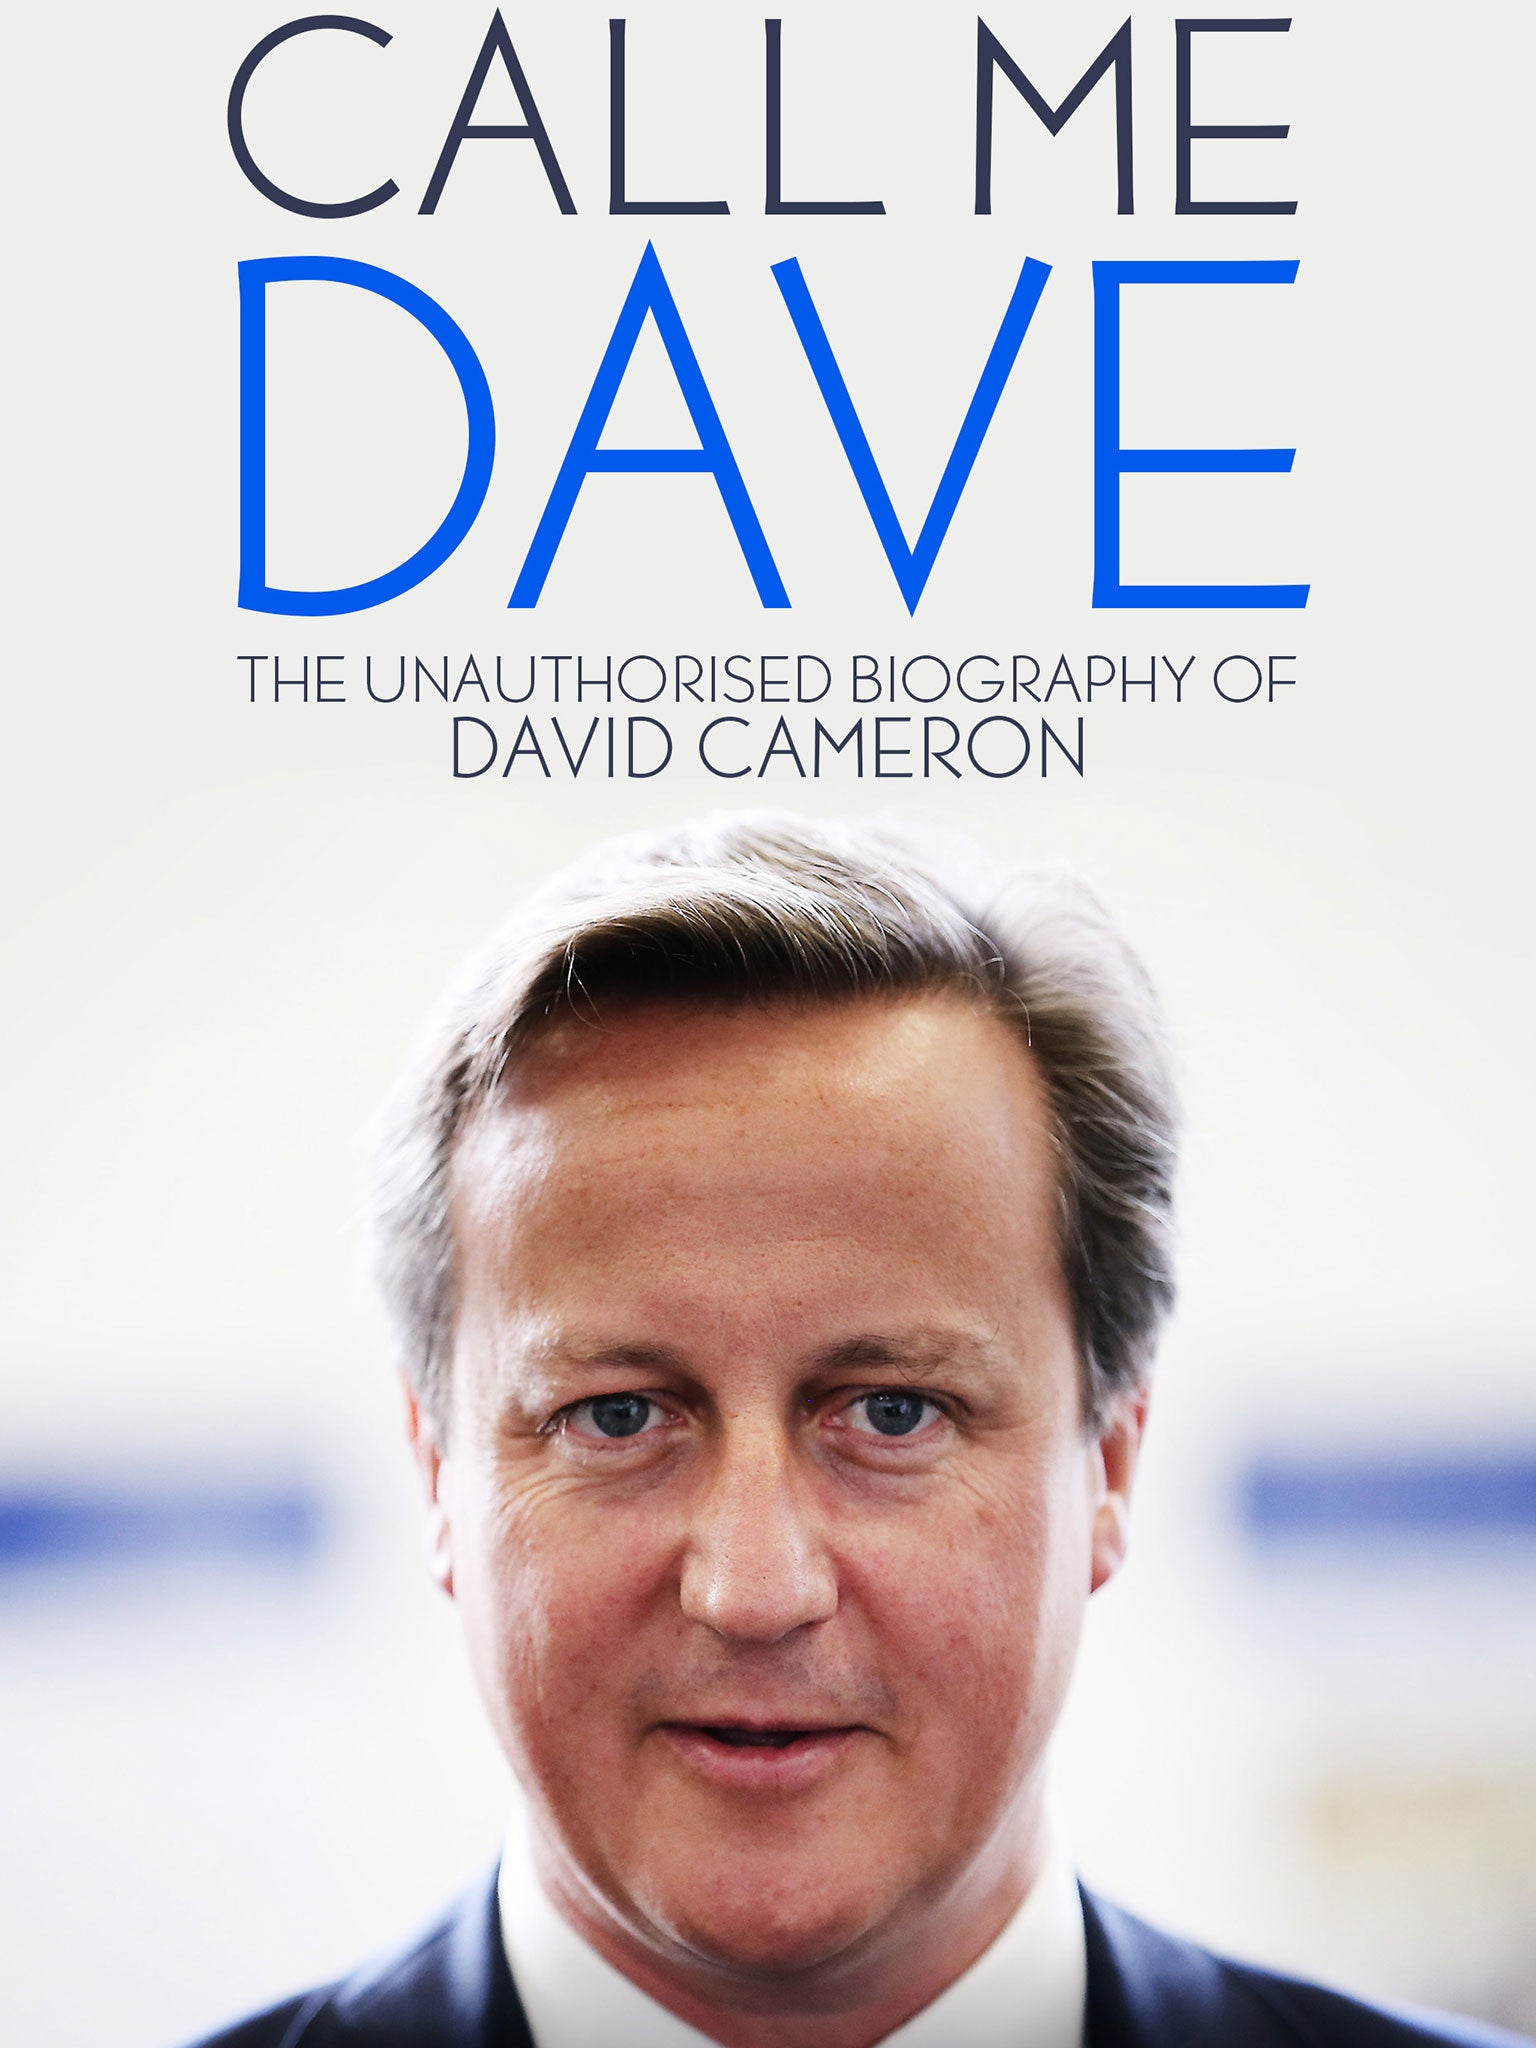 ‘Call Me Dave’ by Lord Ashcroft and Isabel Oakeshott is published on 12 October 2015